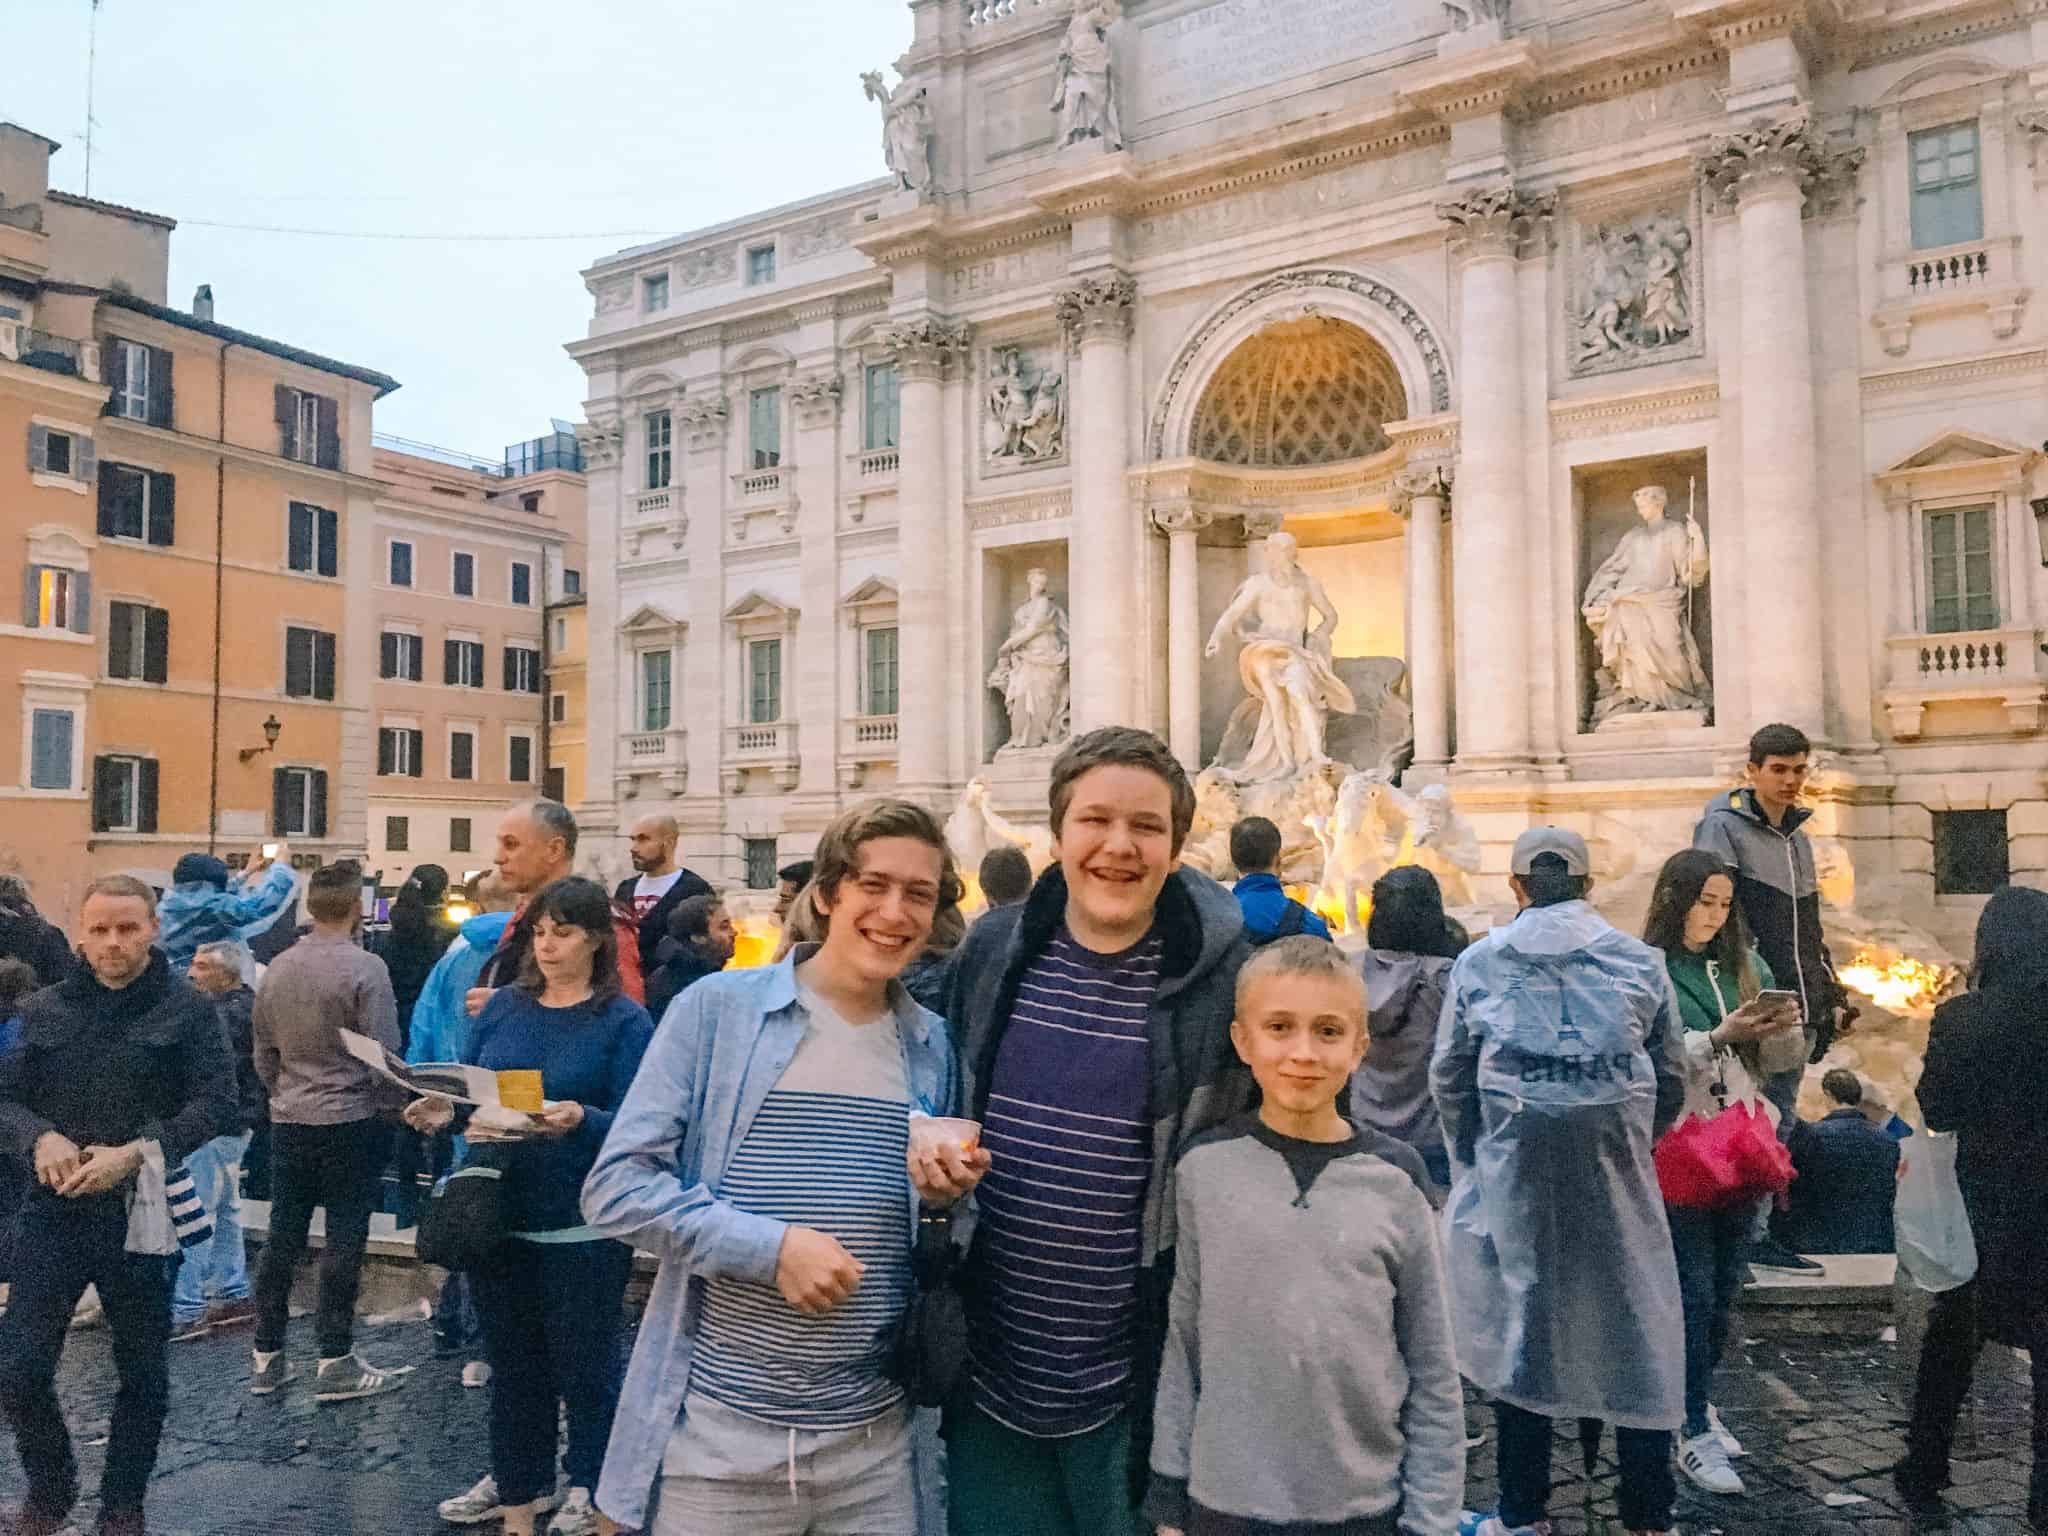 <p>When planning a <a href="https://travelswiththecrew.com/37-things-you-need-to-do-before-your-first-trip-to-italy/">family trip to Italy</a>, selecting the right itinerary and timing is crucial to manage costs effectively.</p>